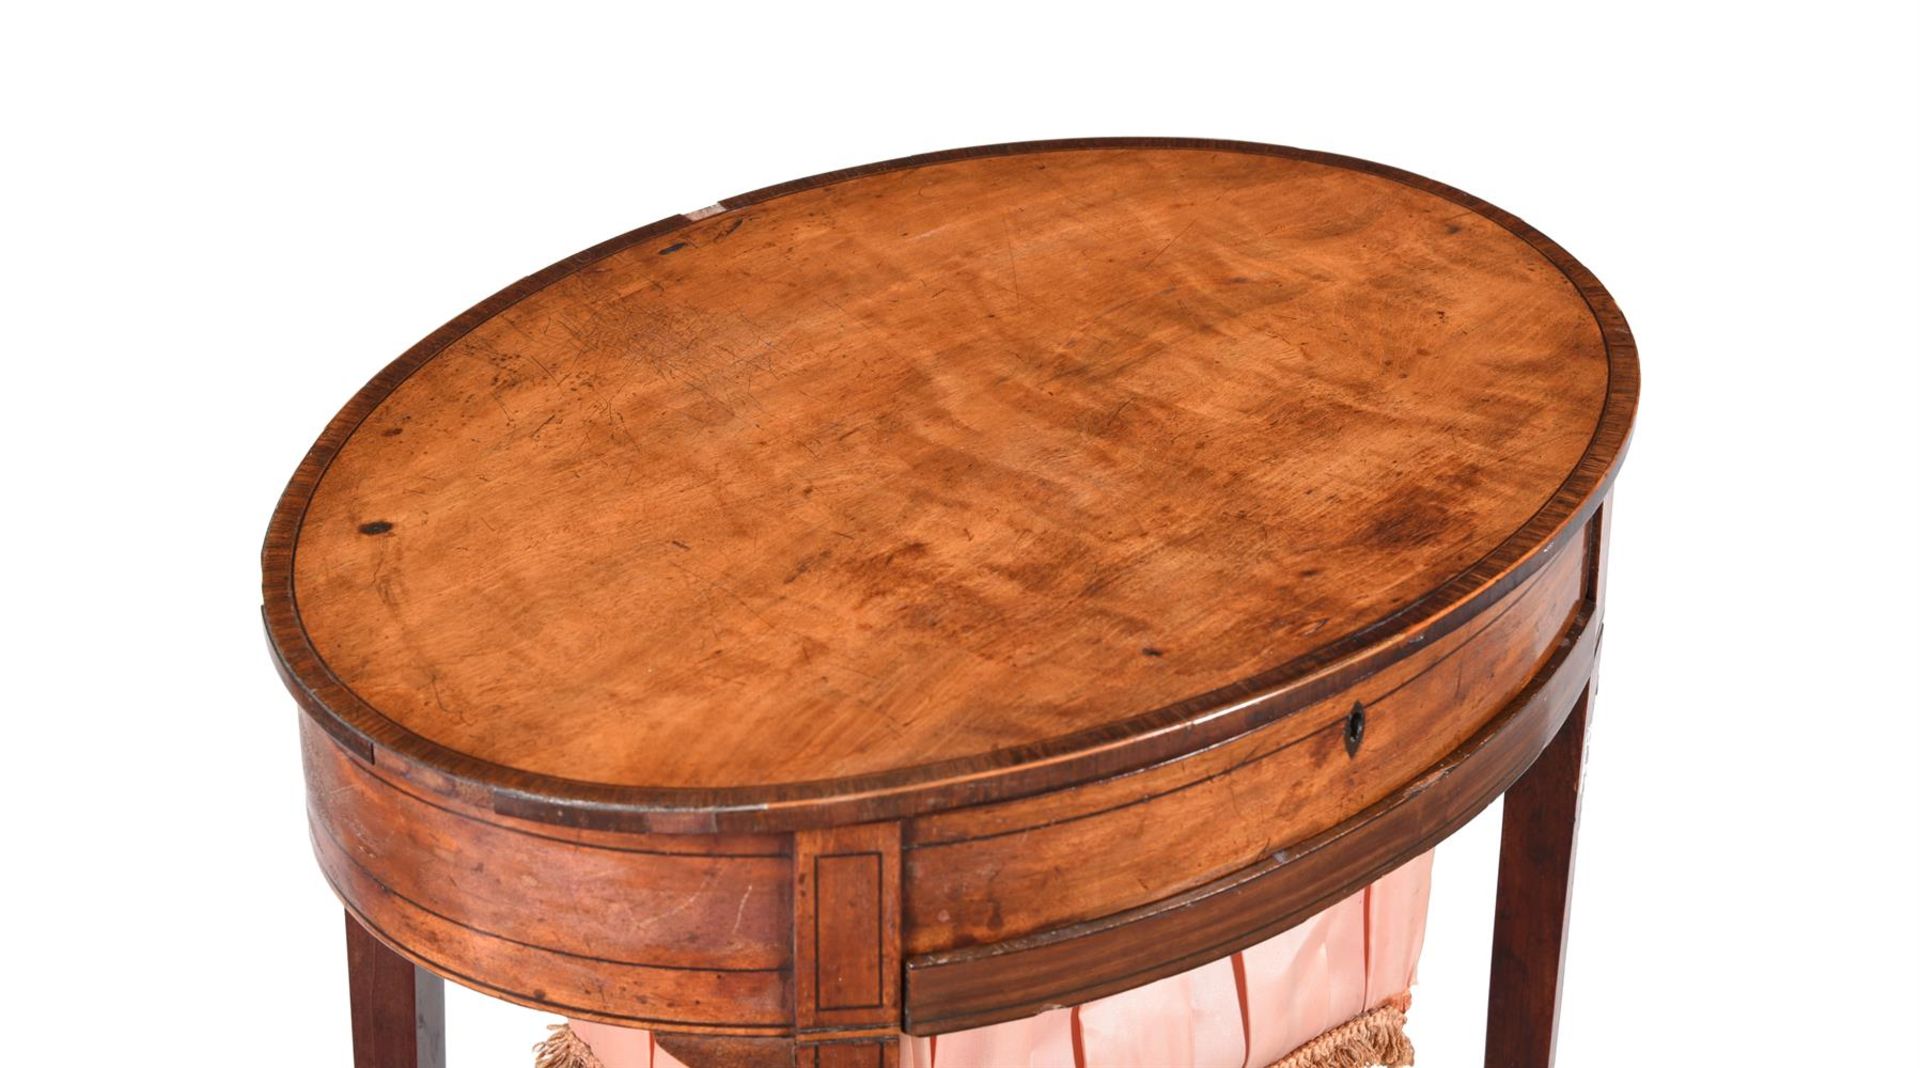 Y A GEORGE III OVAL SATINWOOD AND ROSEWOOD BANDED WORK TABLE - Image 2 of 2